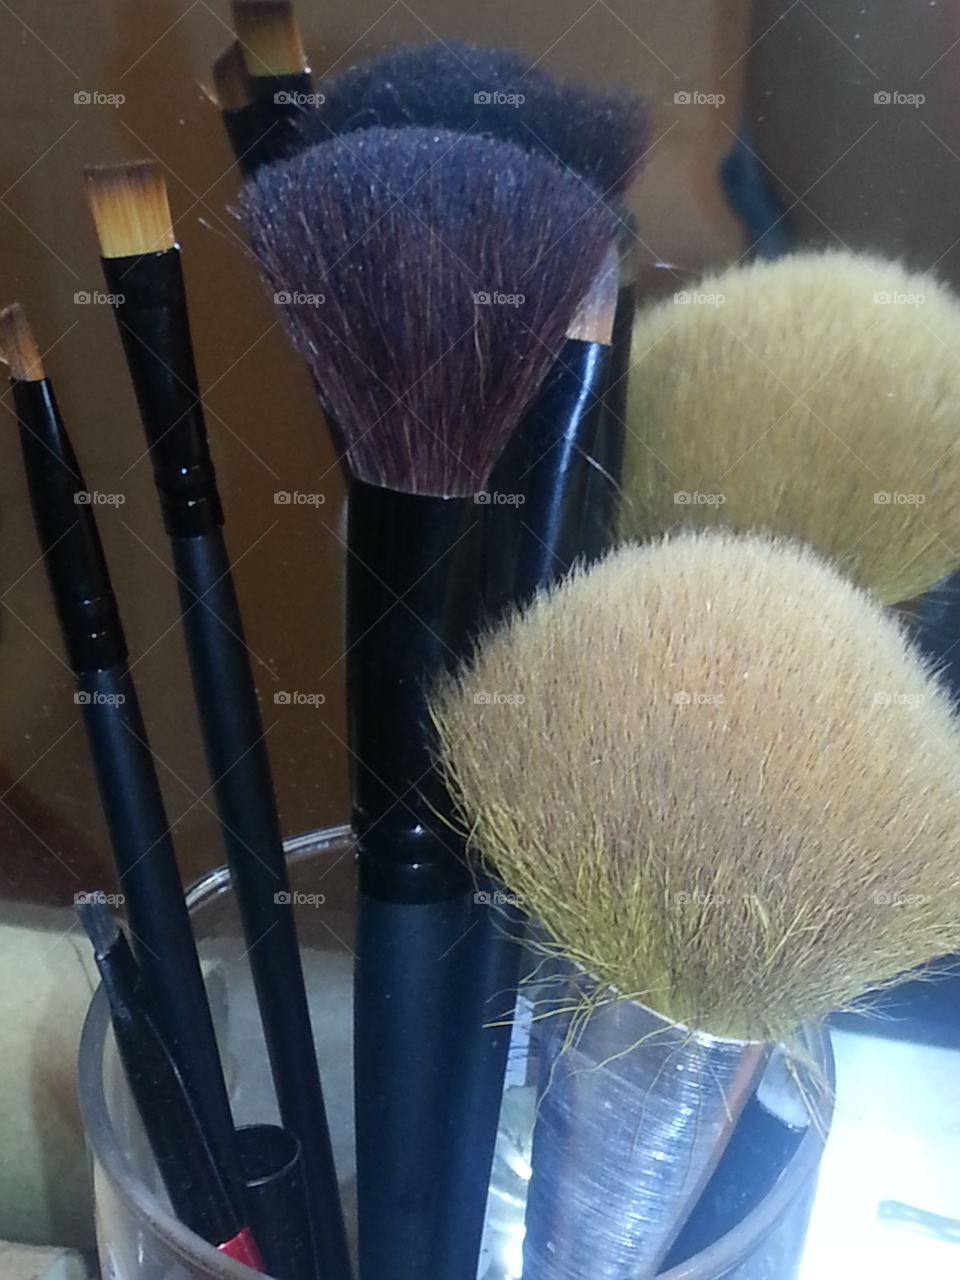 makeup brushes. makeup brushes in the mirror